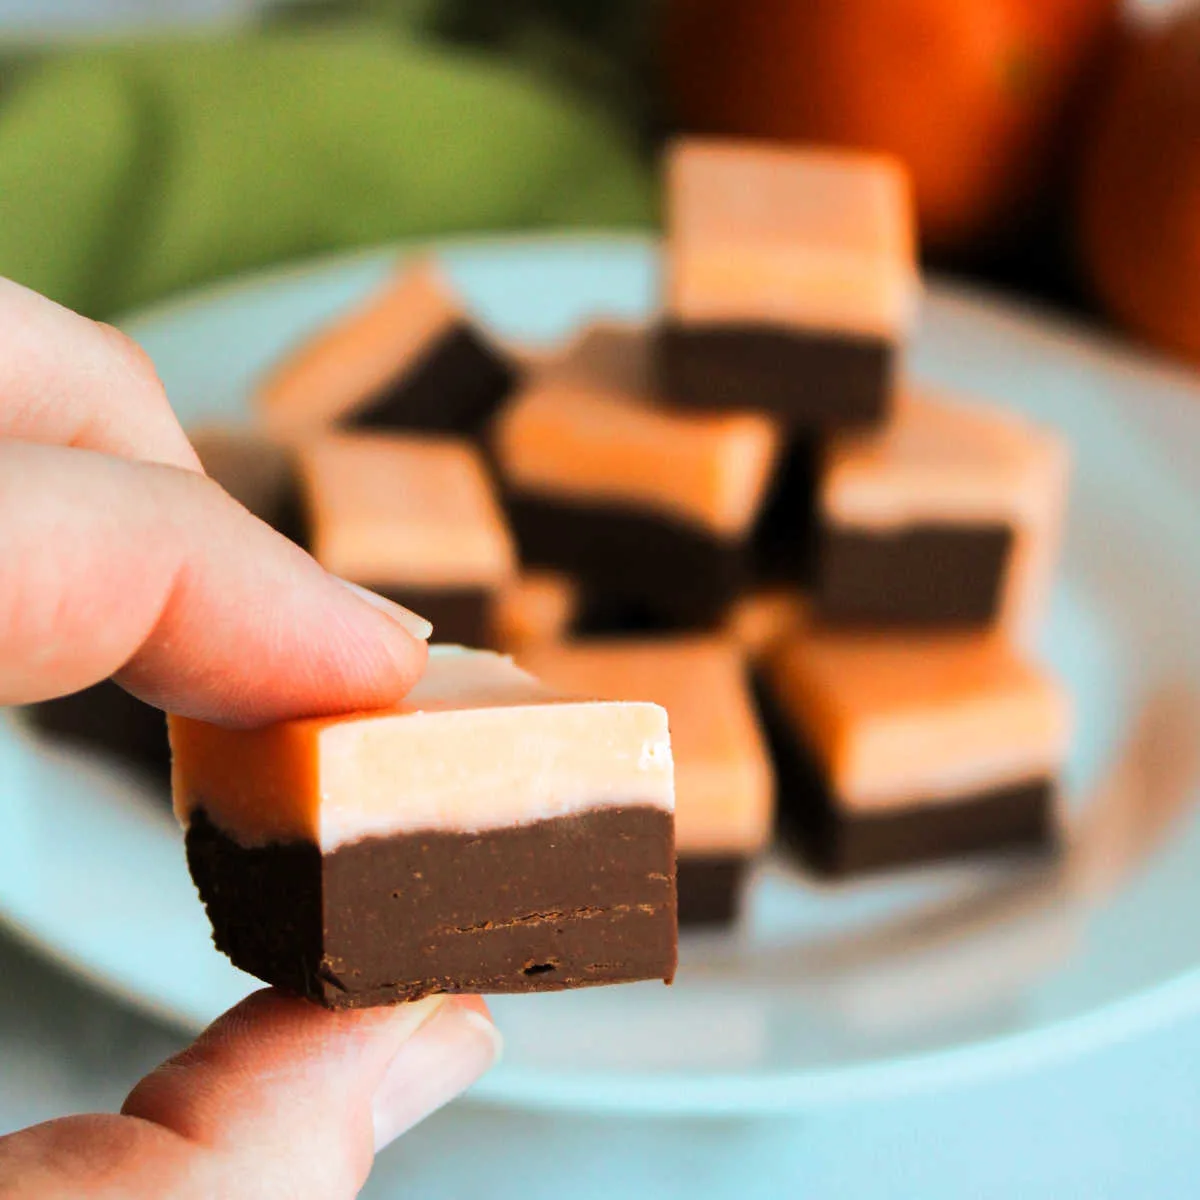 Hand holding piece of fudge with a chocolate layer on the bottom and a layer of creamy orange fudge on the top.